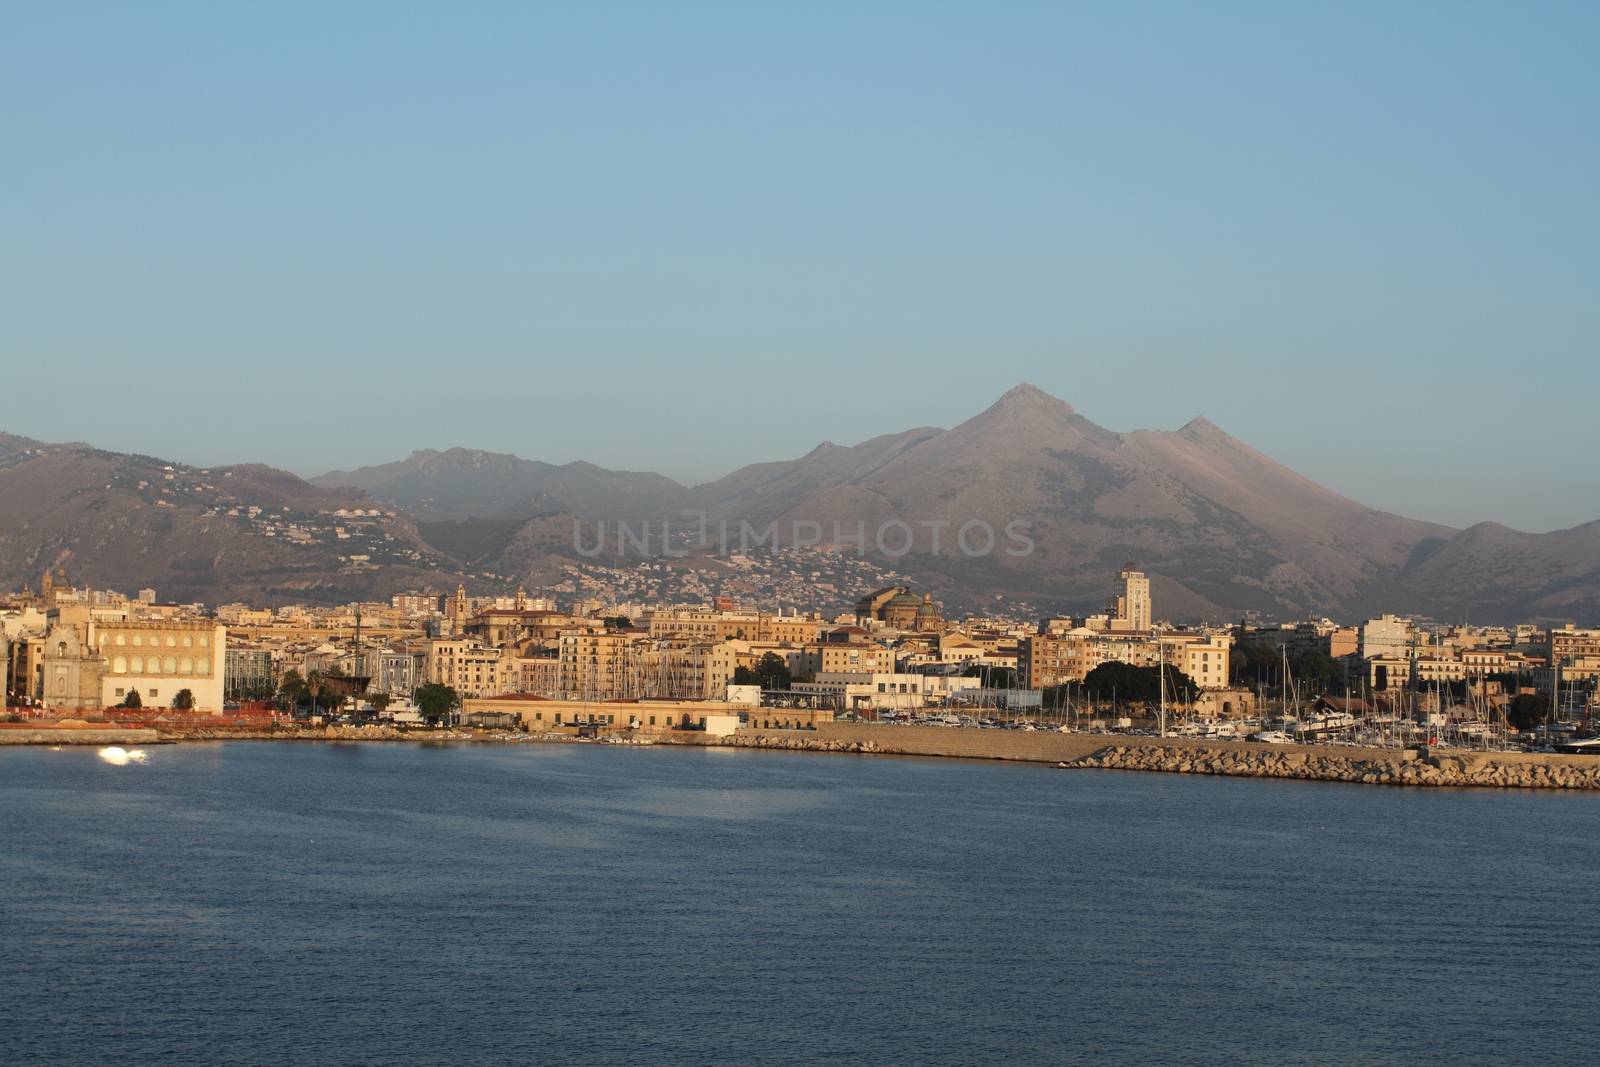 Palermo, Italy - June 29, 2016: View from the sea of the city of Palermo